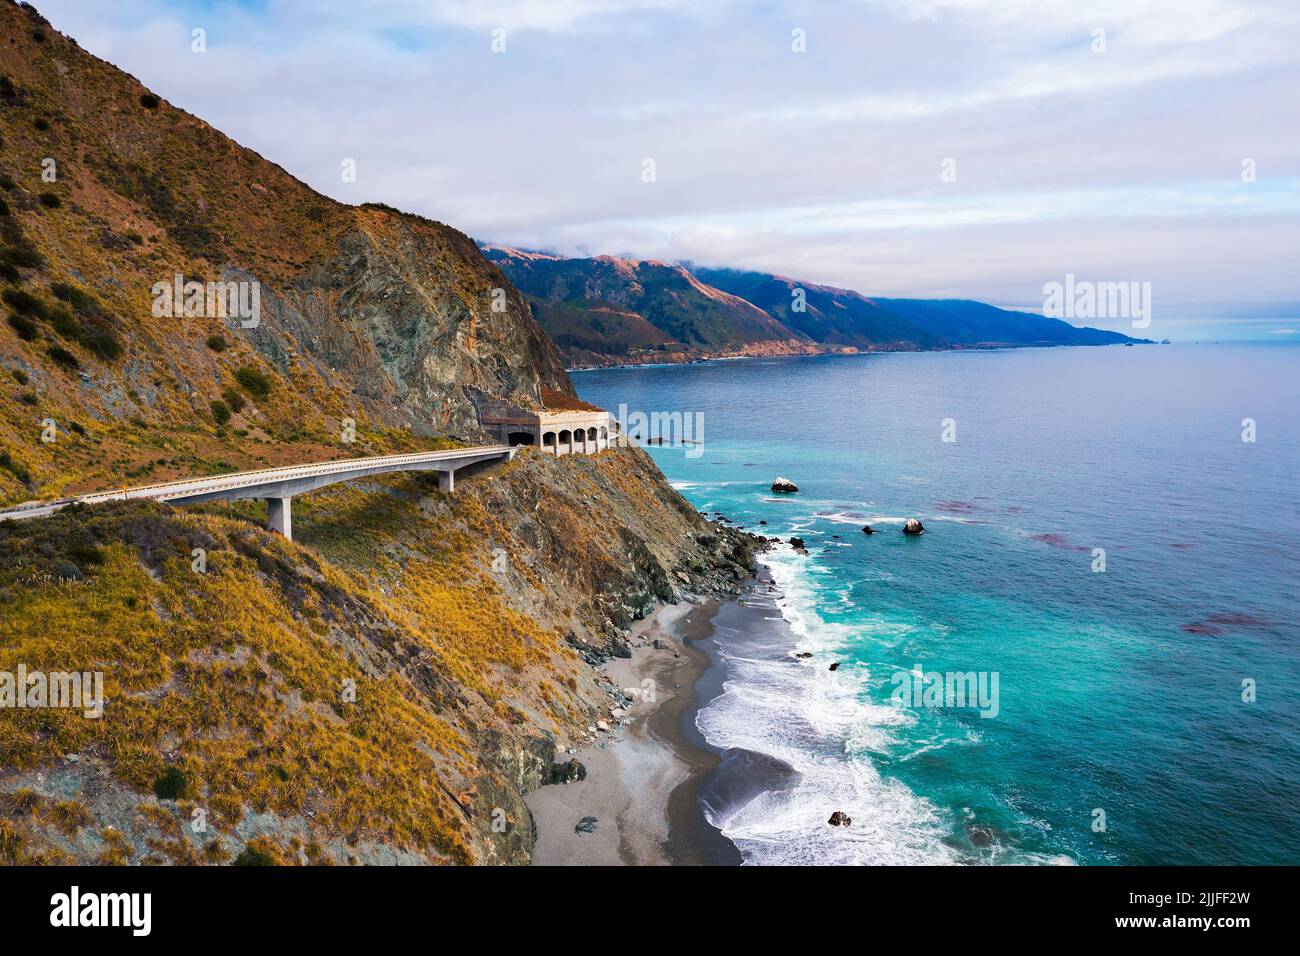 Pitkins Curve Bridge and Rain Rocks Rock Shed in California Stock Photo